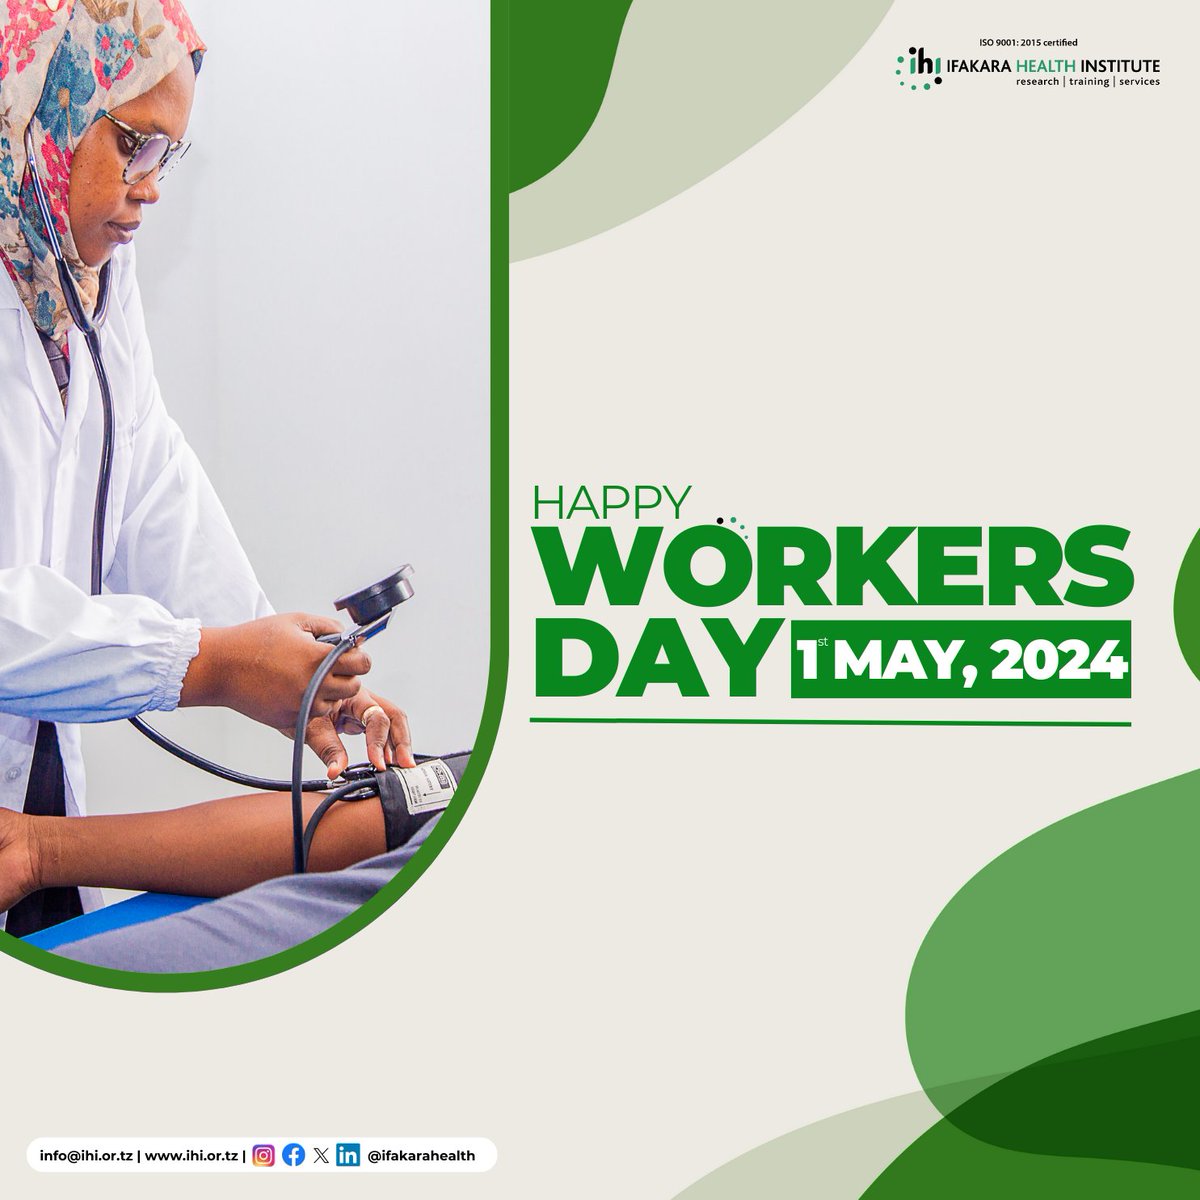 COMMEMORATION: Happy Workers Day! @ifakarahealth wishes all its stakeholders a happy #WorkersDay2024. We value the work of our staff, collaborators and partners in generating evidence and transforming lives today and every day! 👨‍🔬👷🏼👩🏻‍💻 >> ihi.or.tz/our-events/421… >>